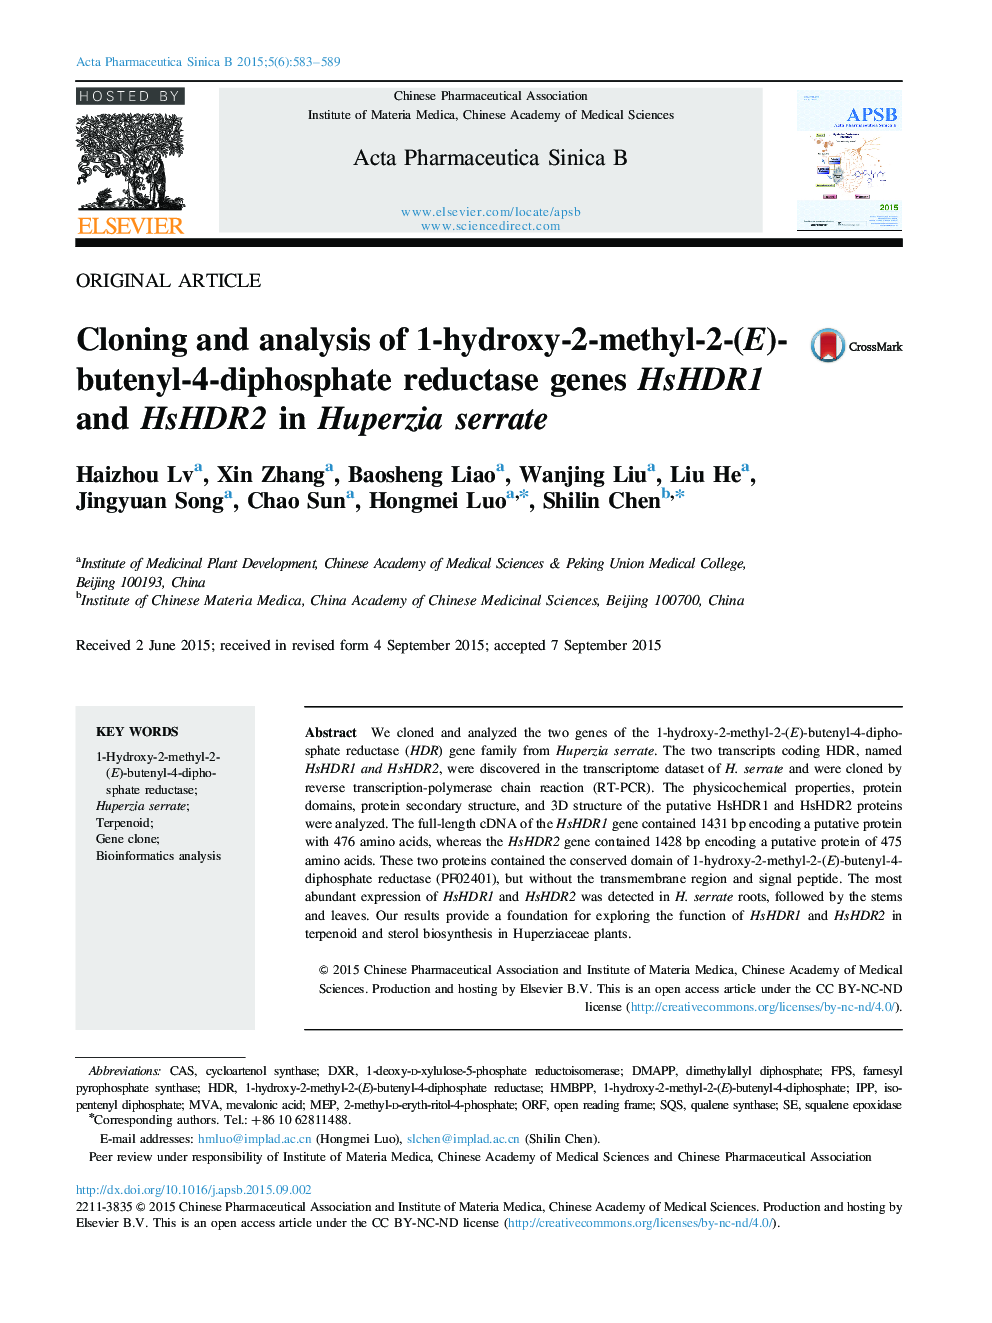 Cloning and analysis of 1-hydroxy-2-methyl-2-(E)-butenyl-4-diphosphate reductase genes HsHDR1 and HsHDR2 in Huperzia serrate 